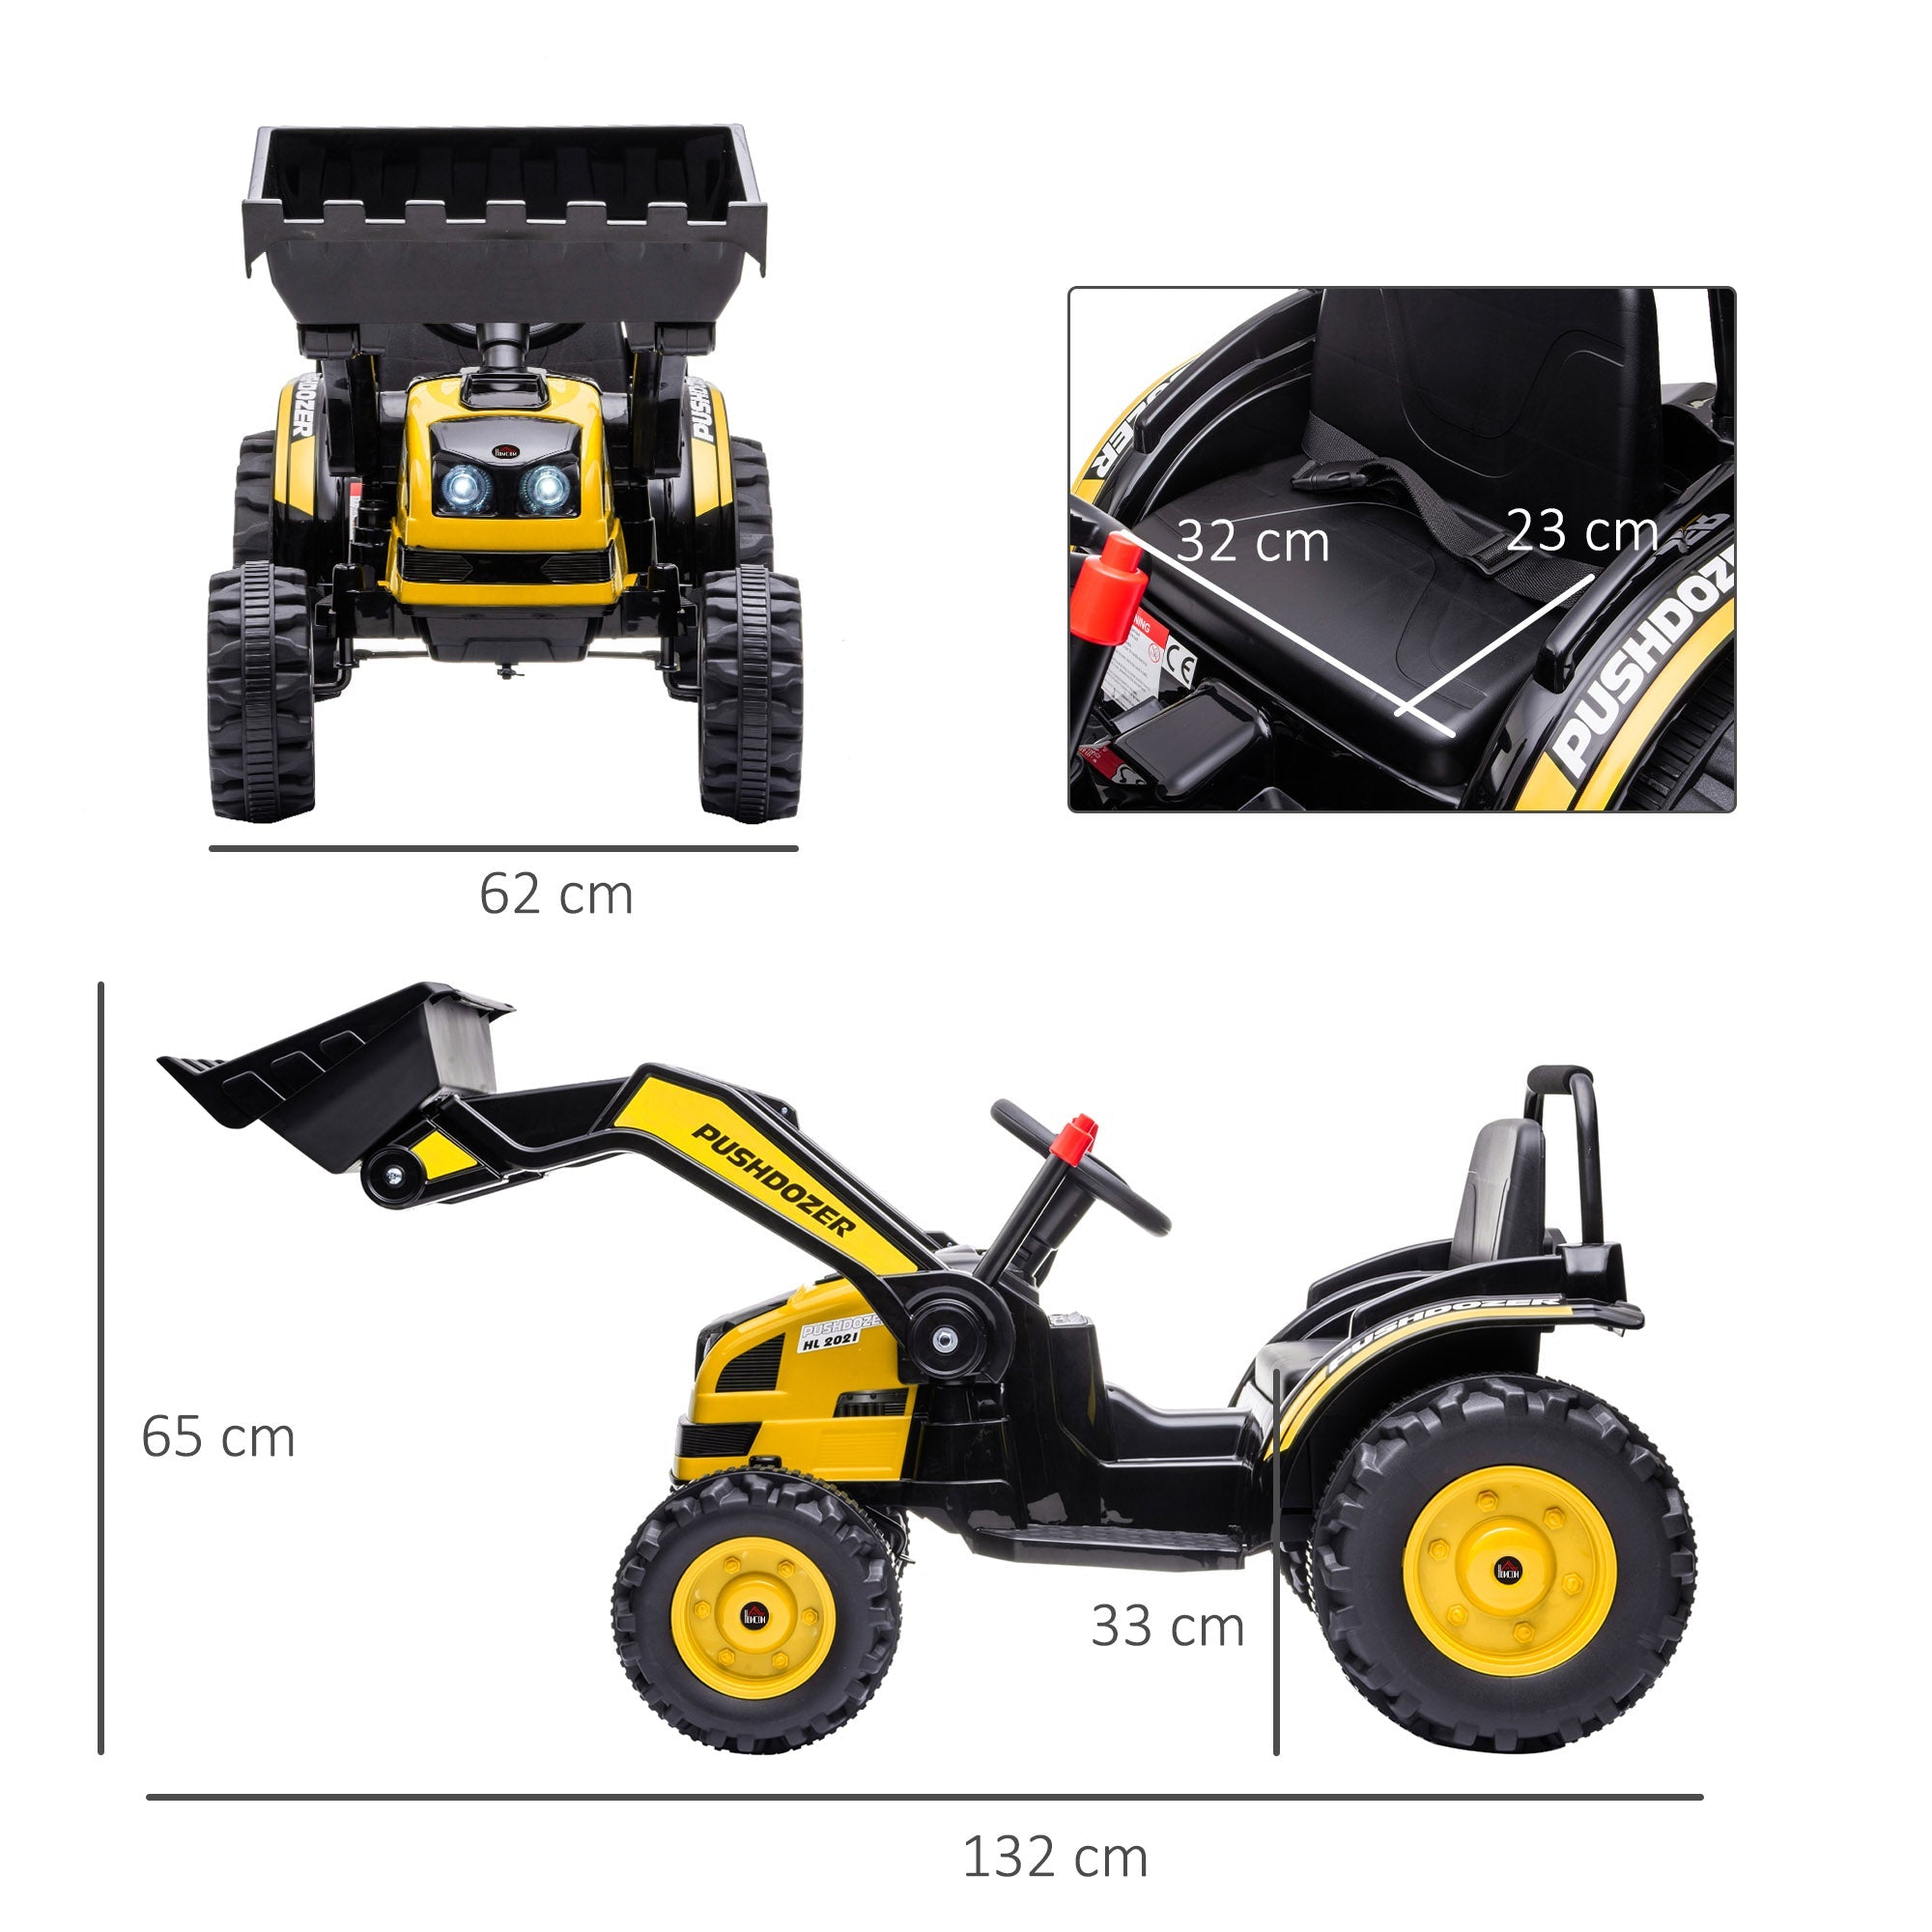 Kids Digger Ride On Excavator 6V Battery Powered Construction Tractor Music Headlight Moving Forward Backward Gear for 3-5 years old Yellow-2